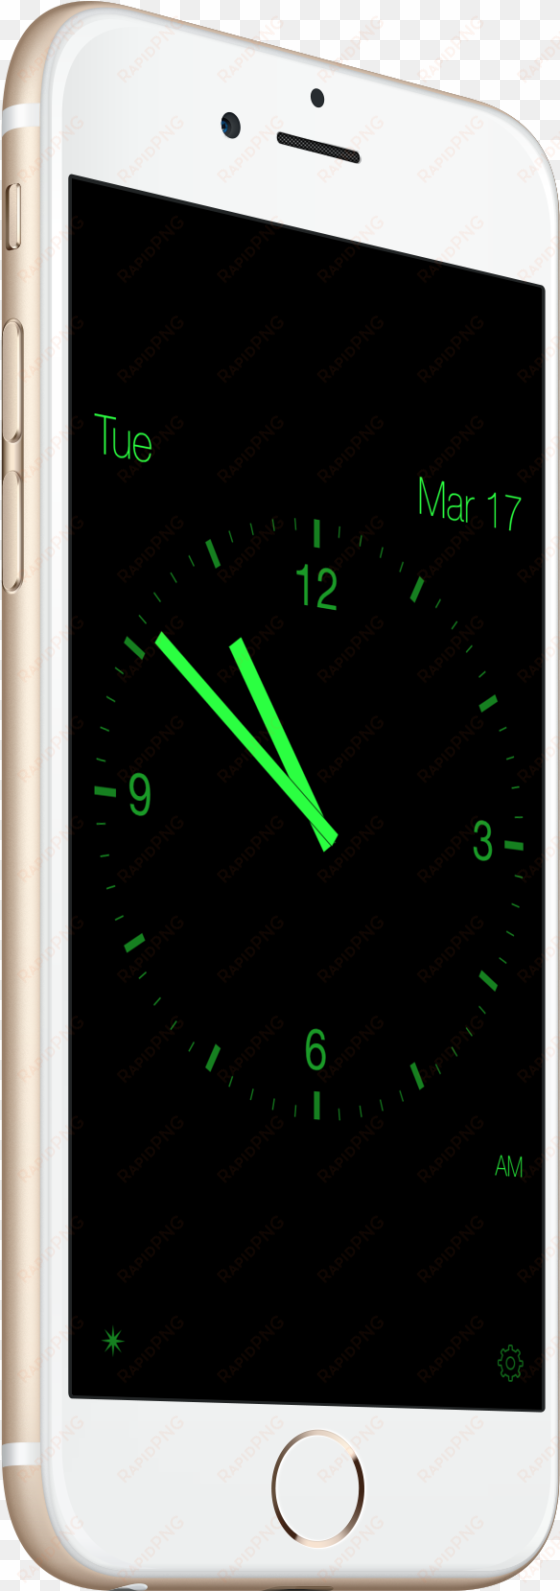 if you have enabled allow “hey siri ” you can activate - iphone 6 clock display